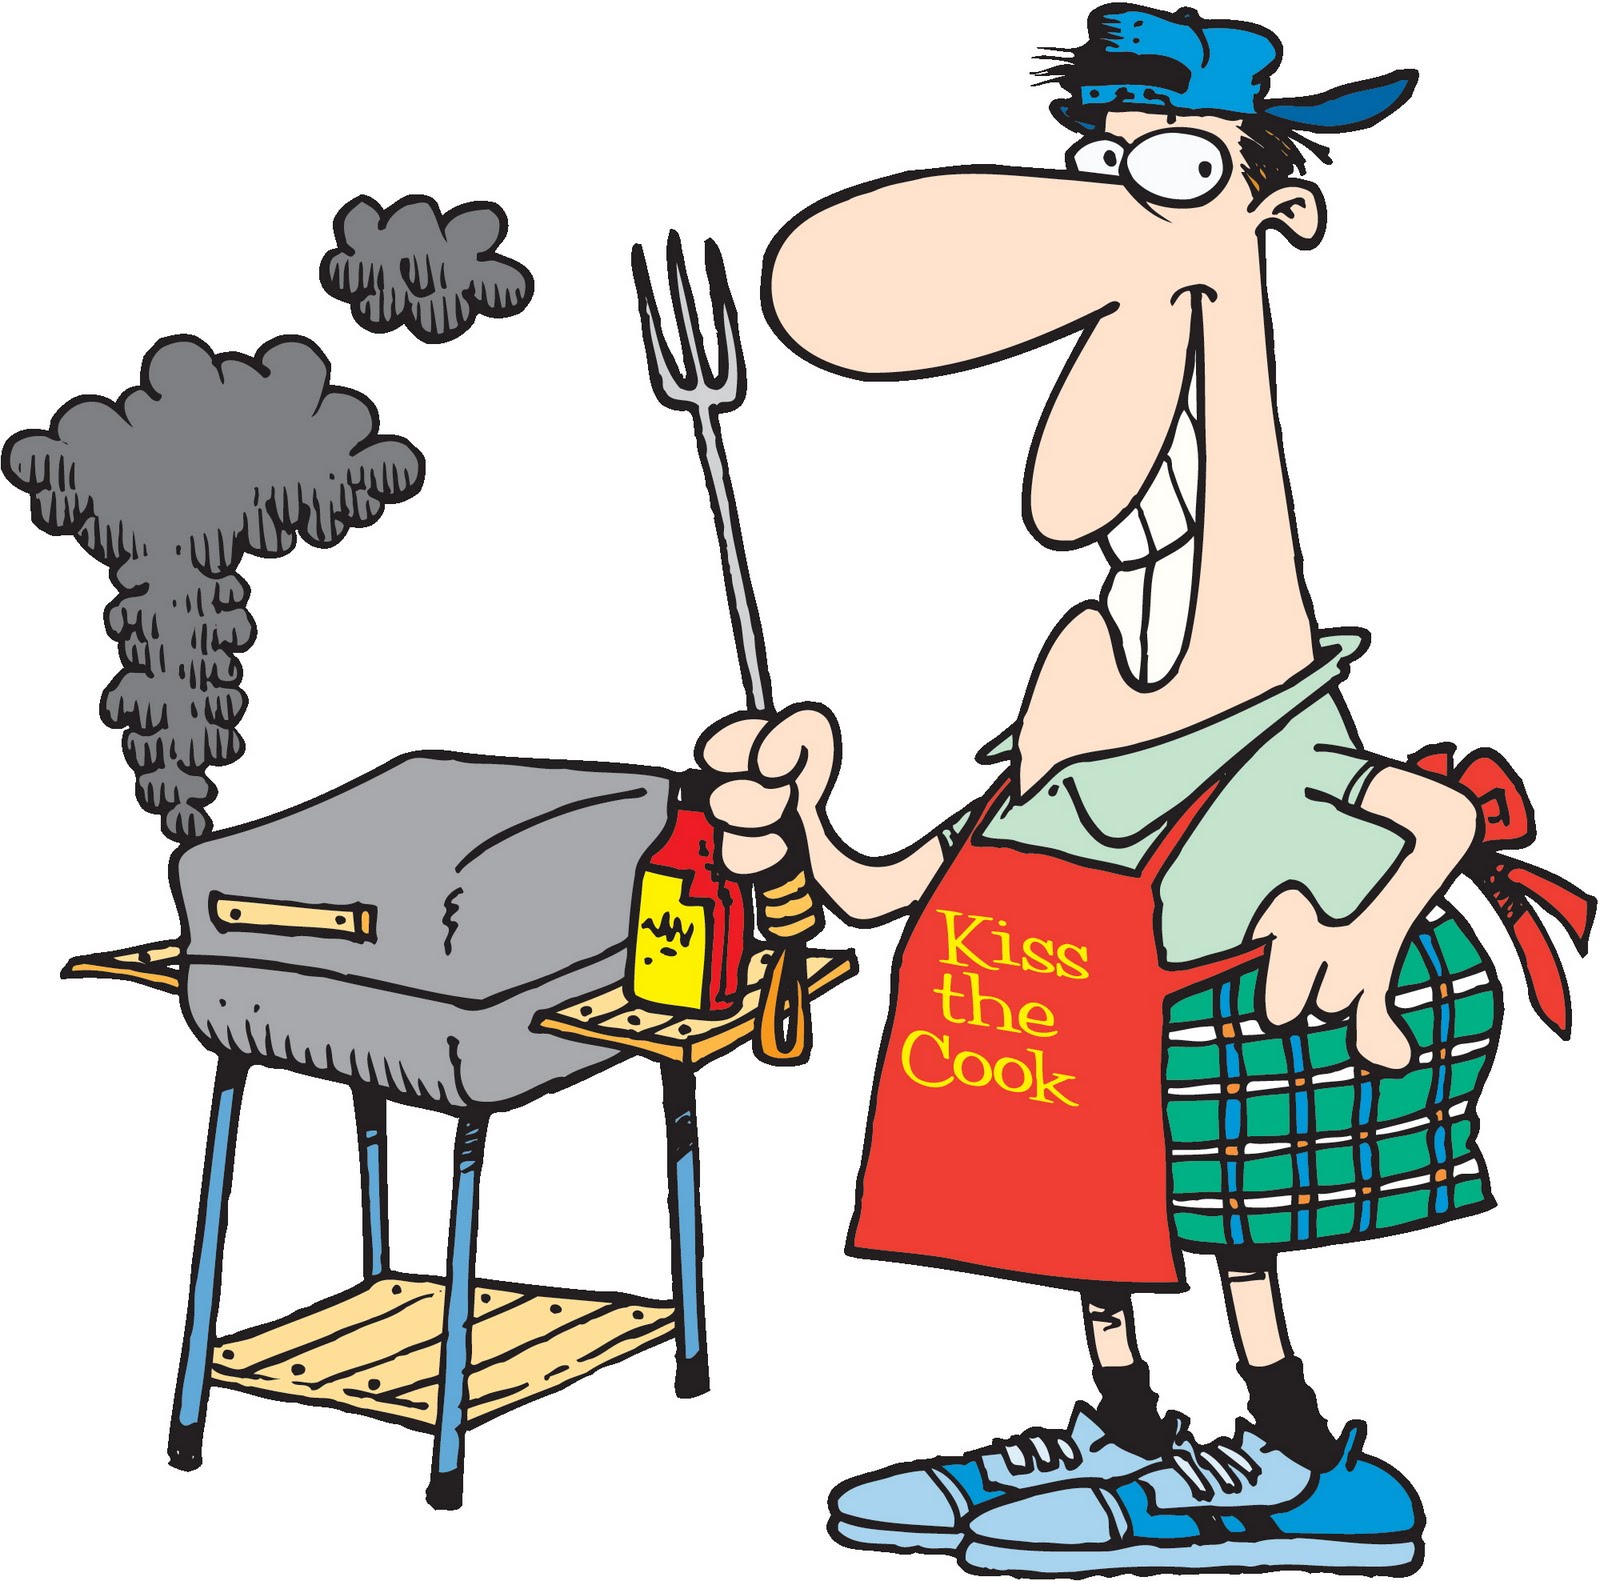 Bbq party clipart free clipart images 2